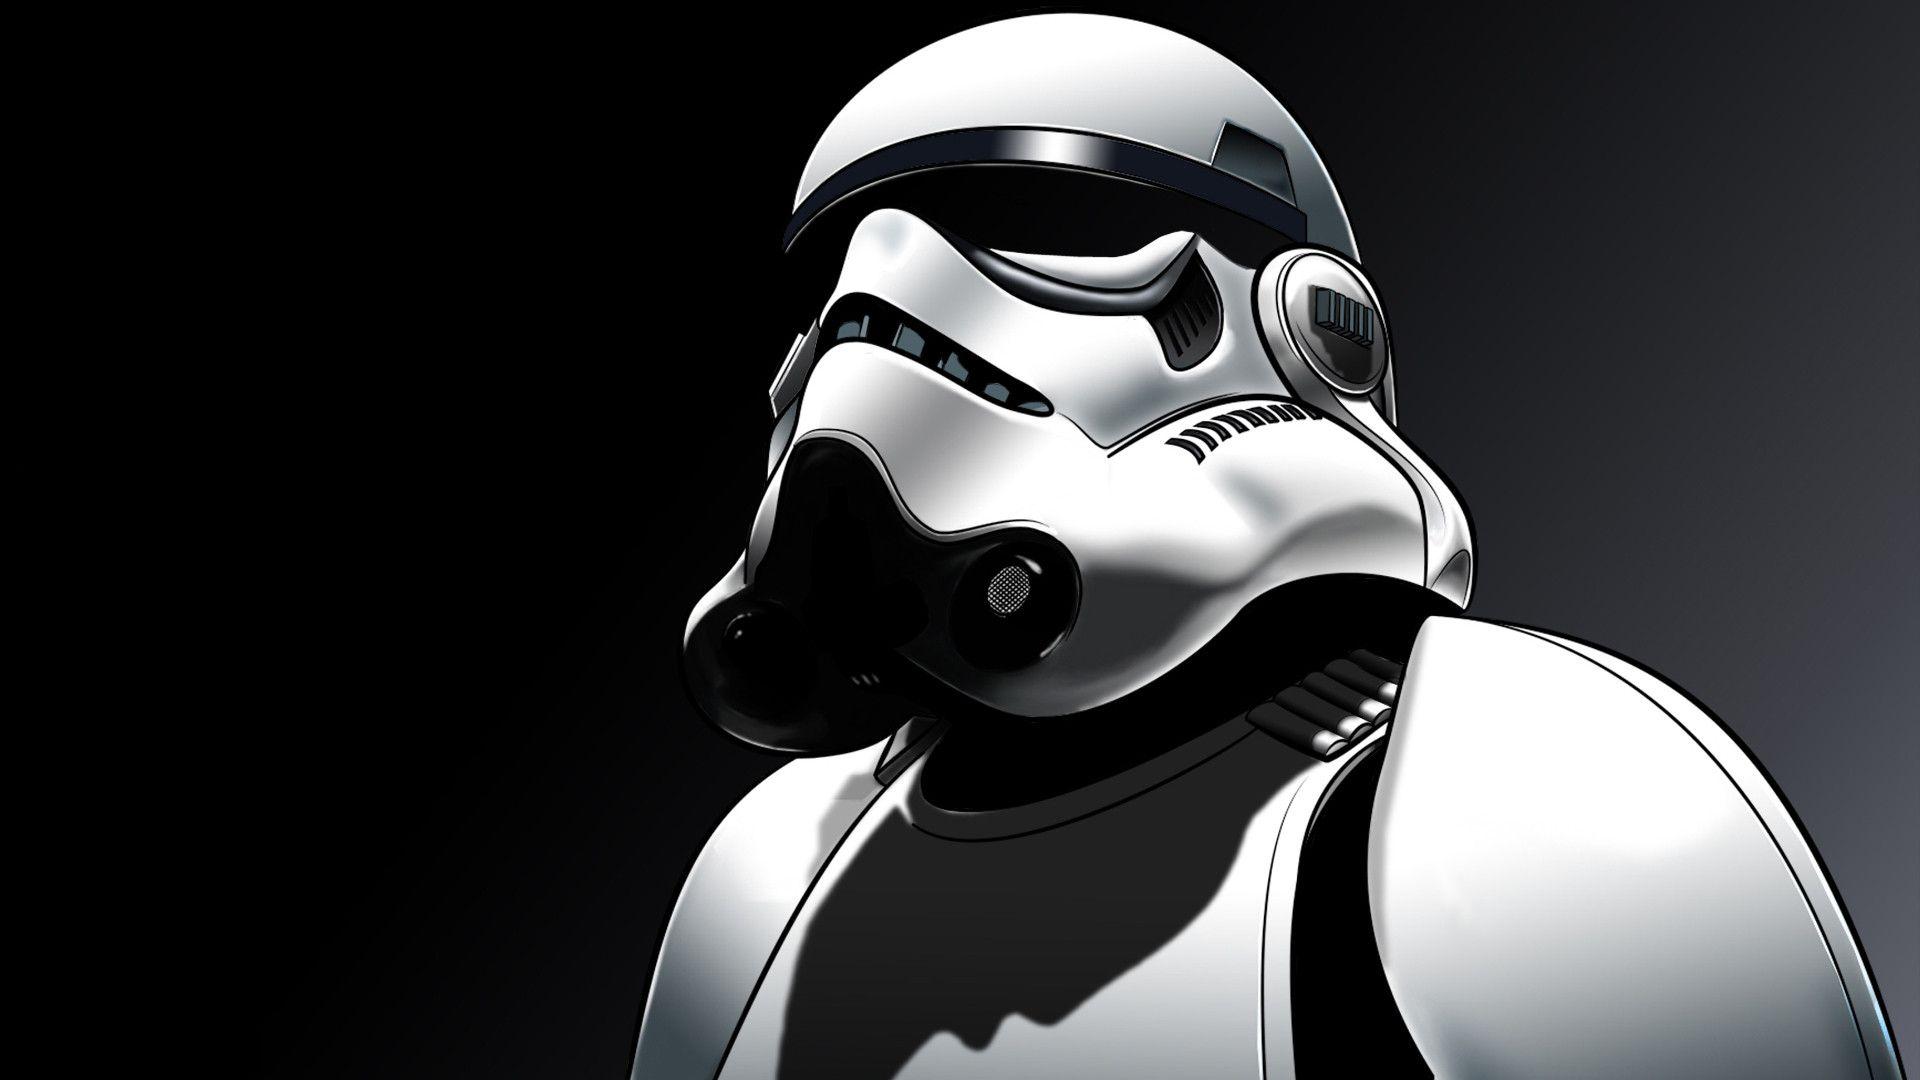 Wallpaper Of The Day: Star Wars